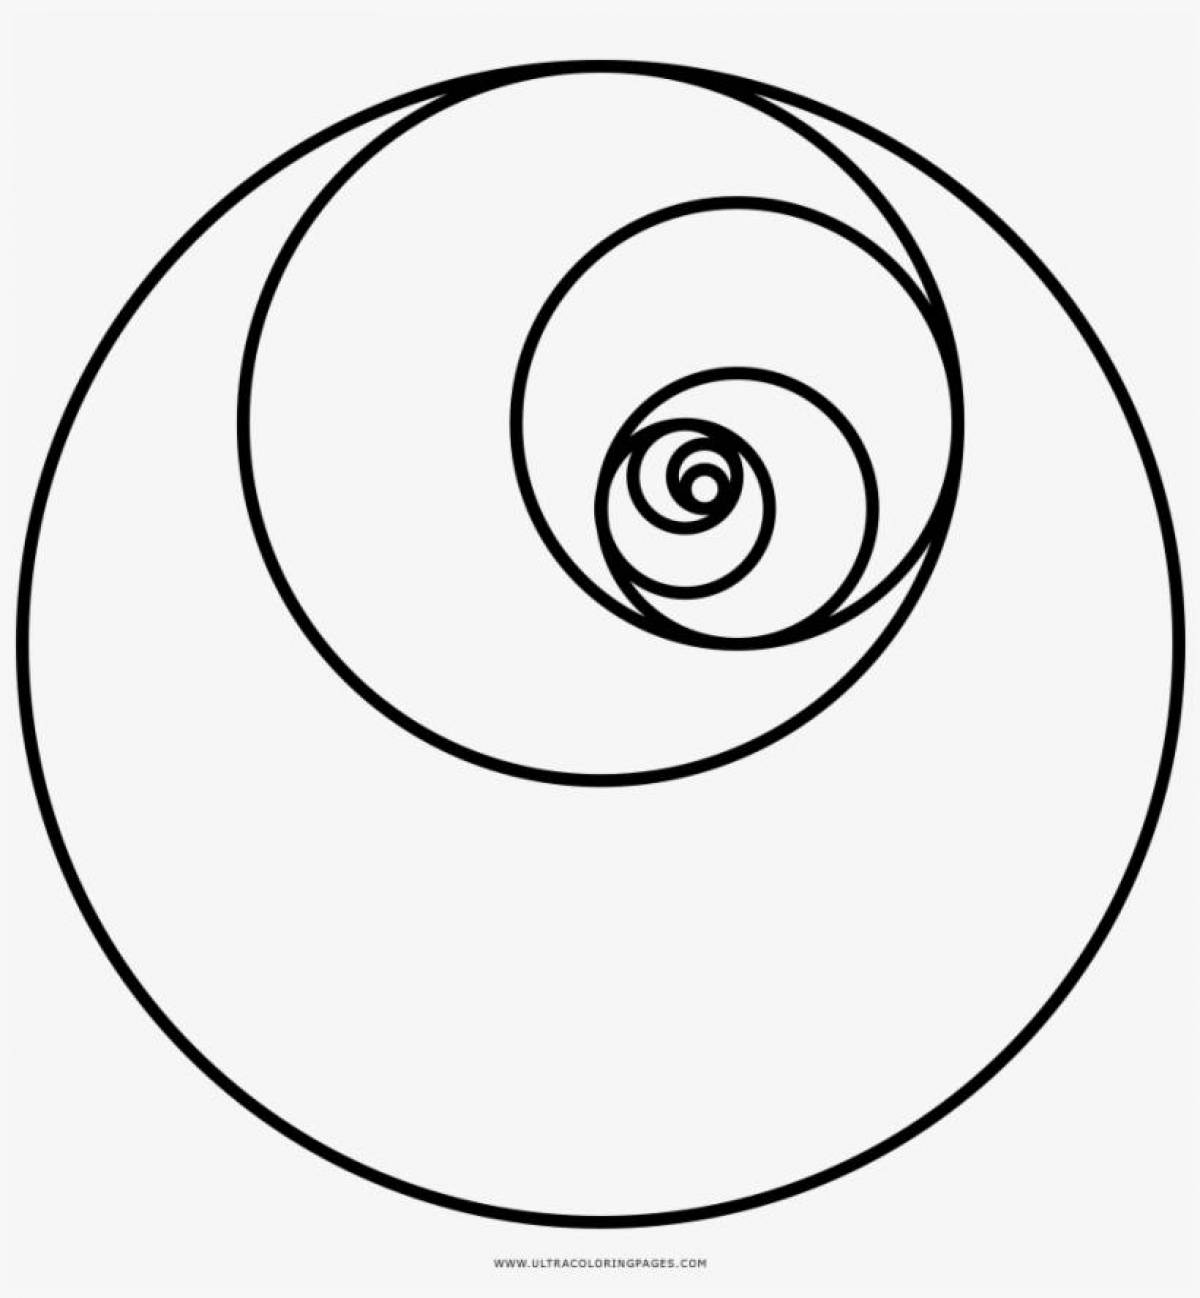 Holiday coloring in a circle in a spiral